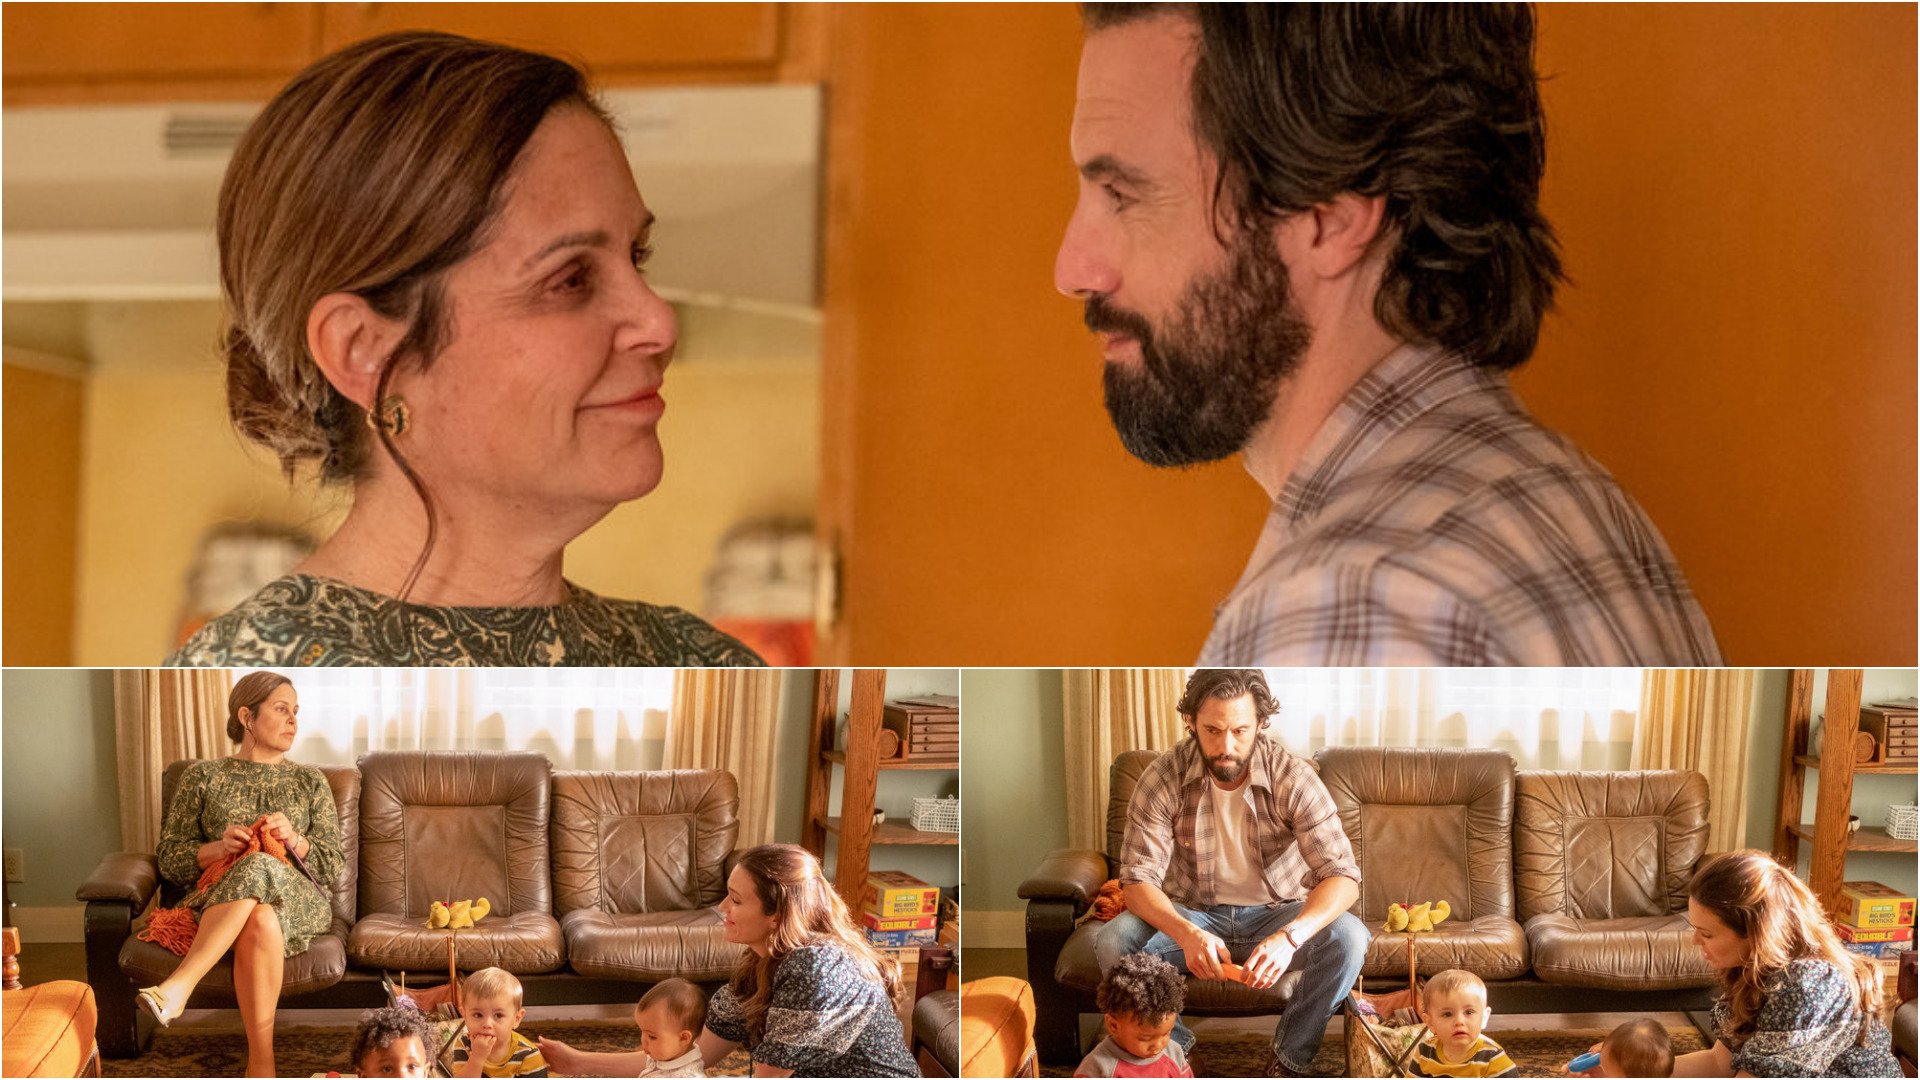 Collage of photos from ‘This Is Us’ Season 6 Episode 4 with Milo Ventimiglia as Jack, Mandy Moore as Rebecca, Laura Niemi as Marilyn, Baby Kate, Baby Kevin, and Baby Randall